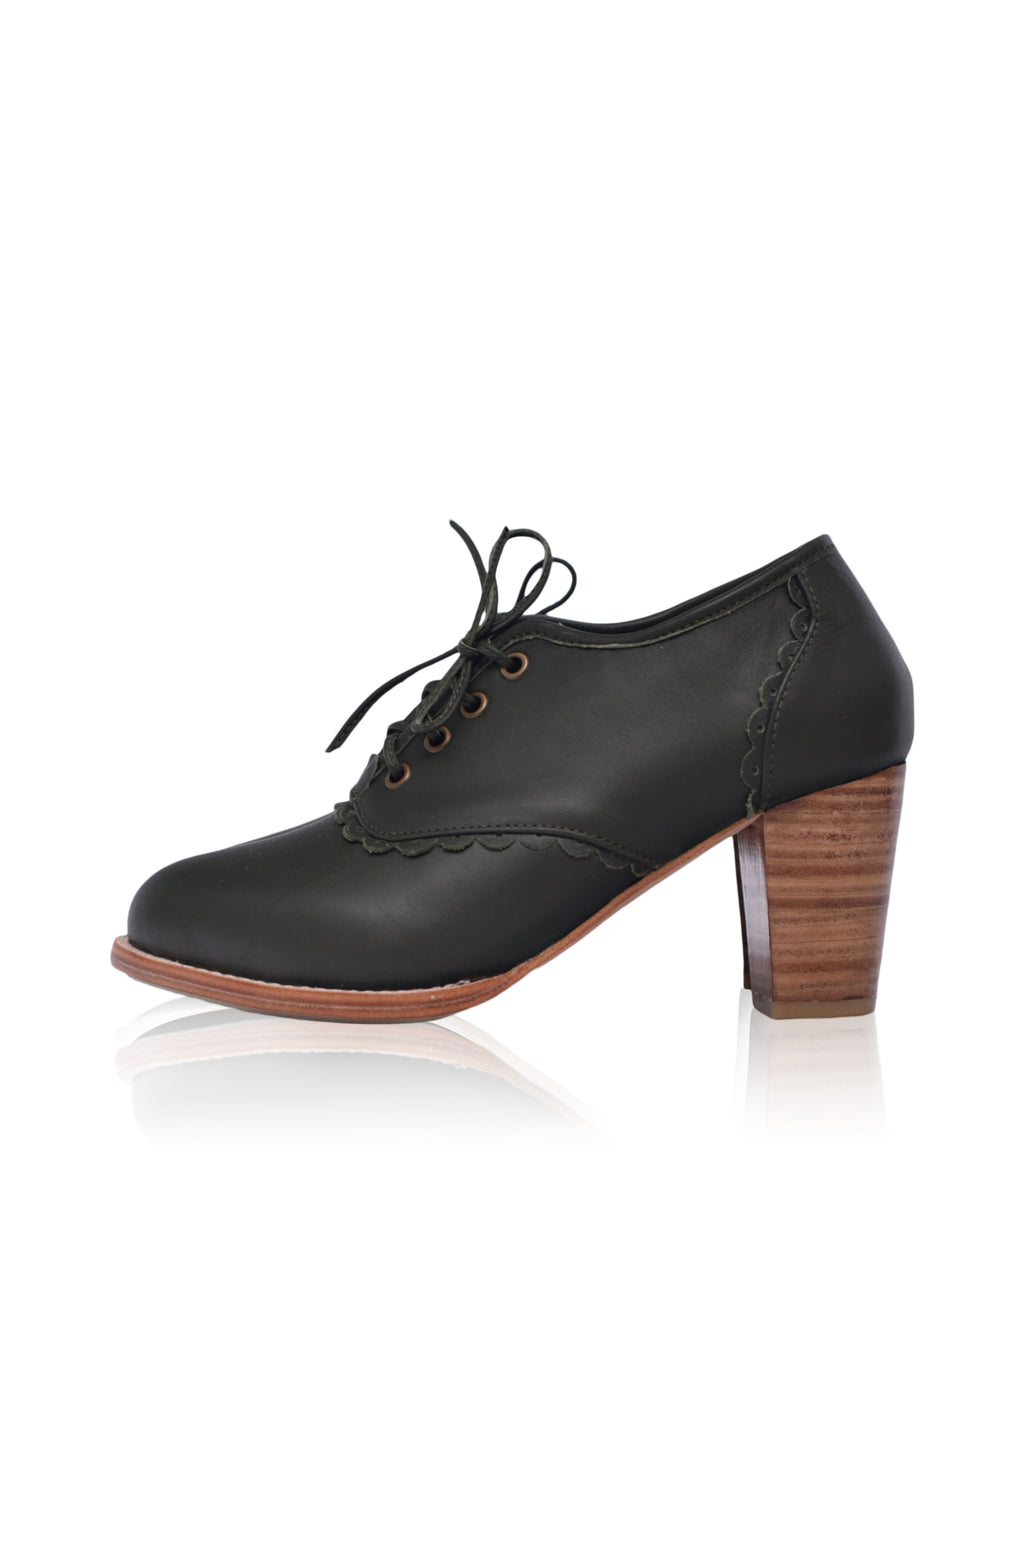 Round Toe Brogue Style Lace Up Mary Jane Shoes — Obiono